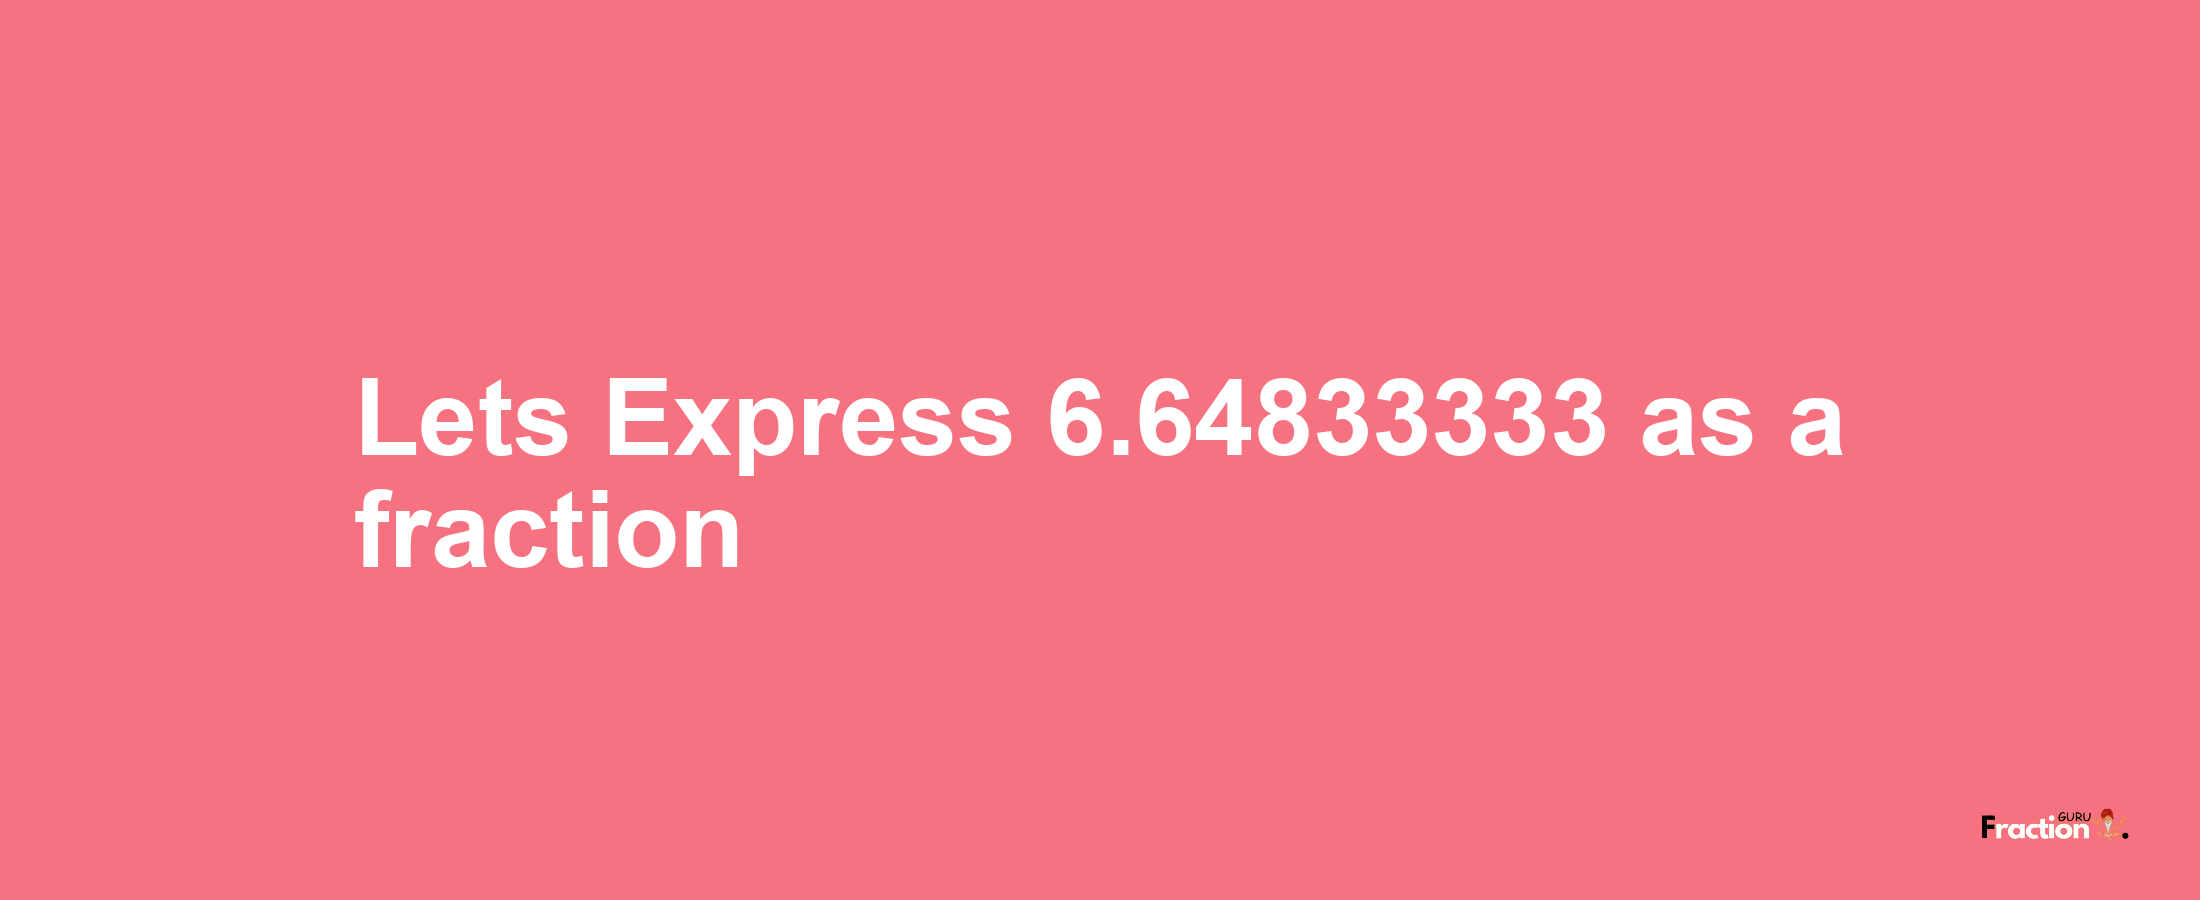 Lets Express 6.64833333 as afraction